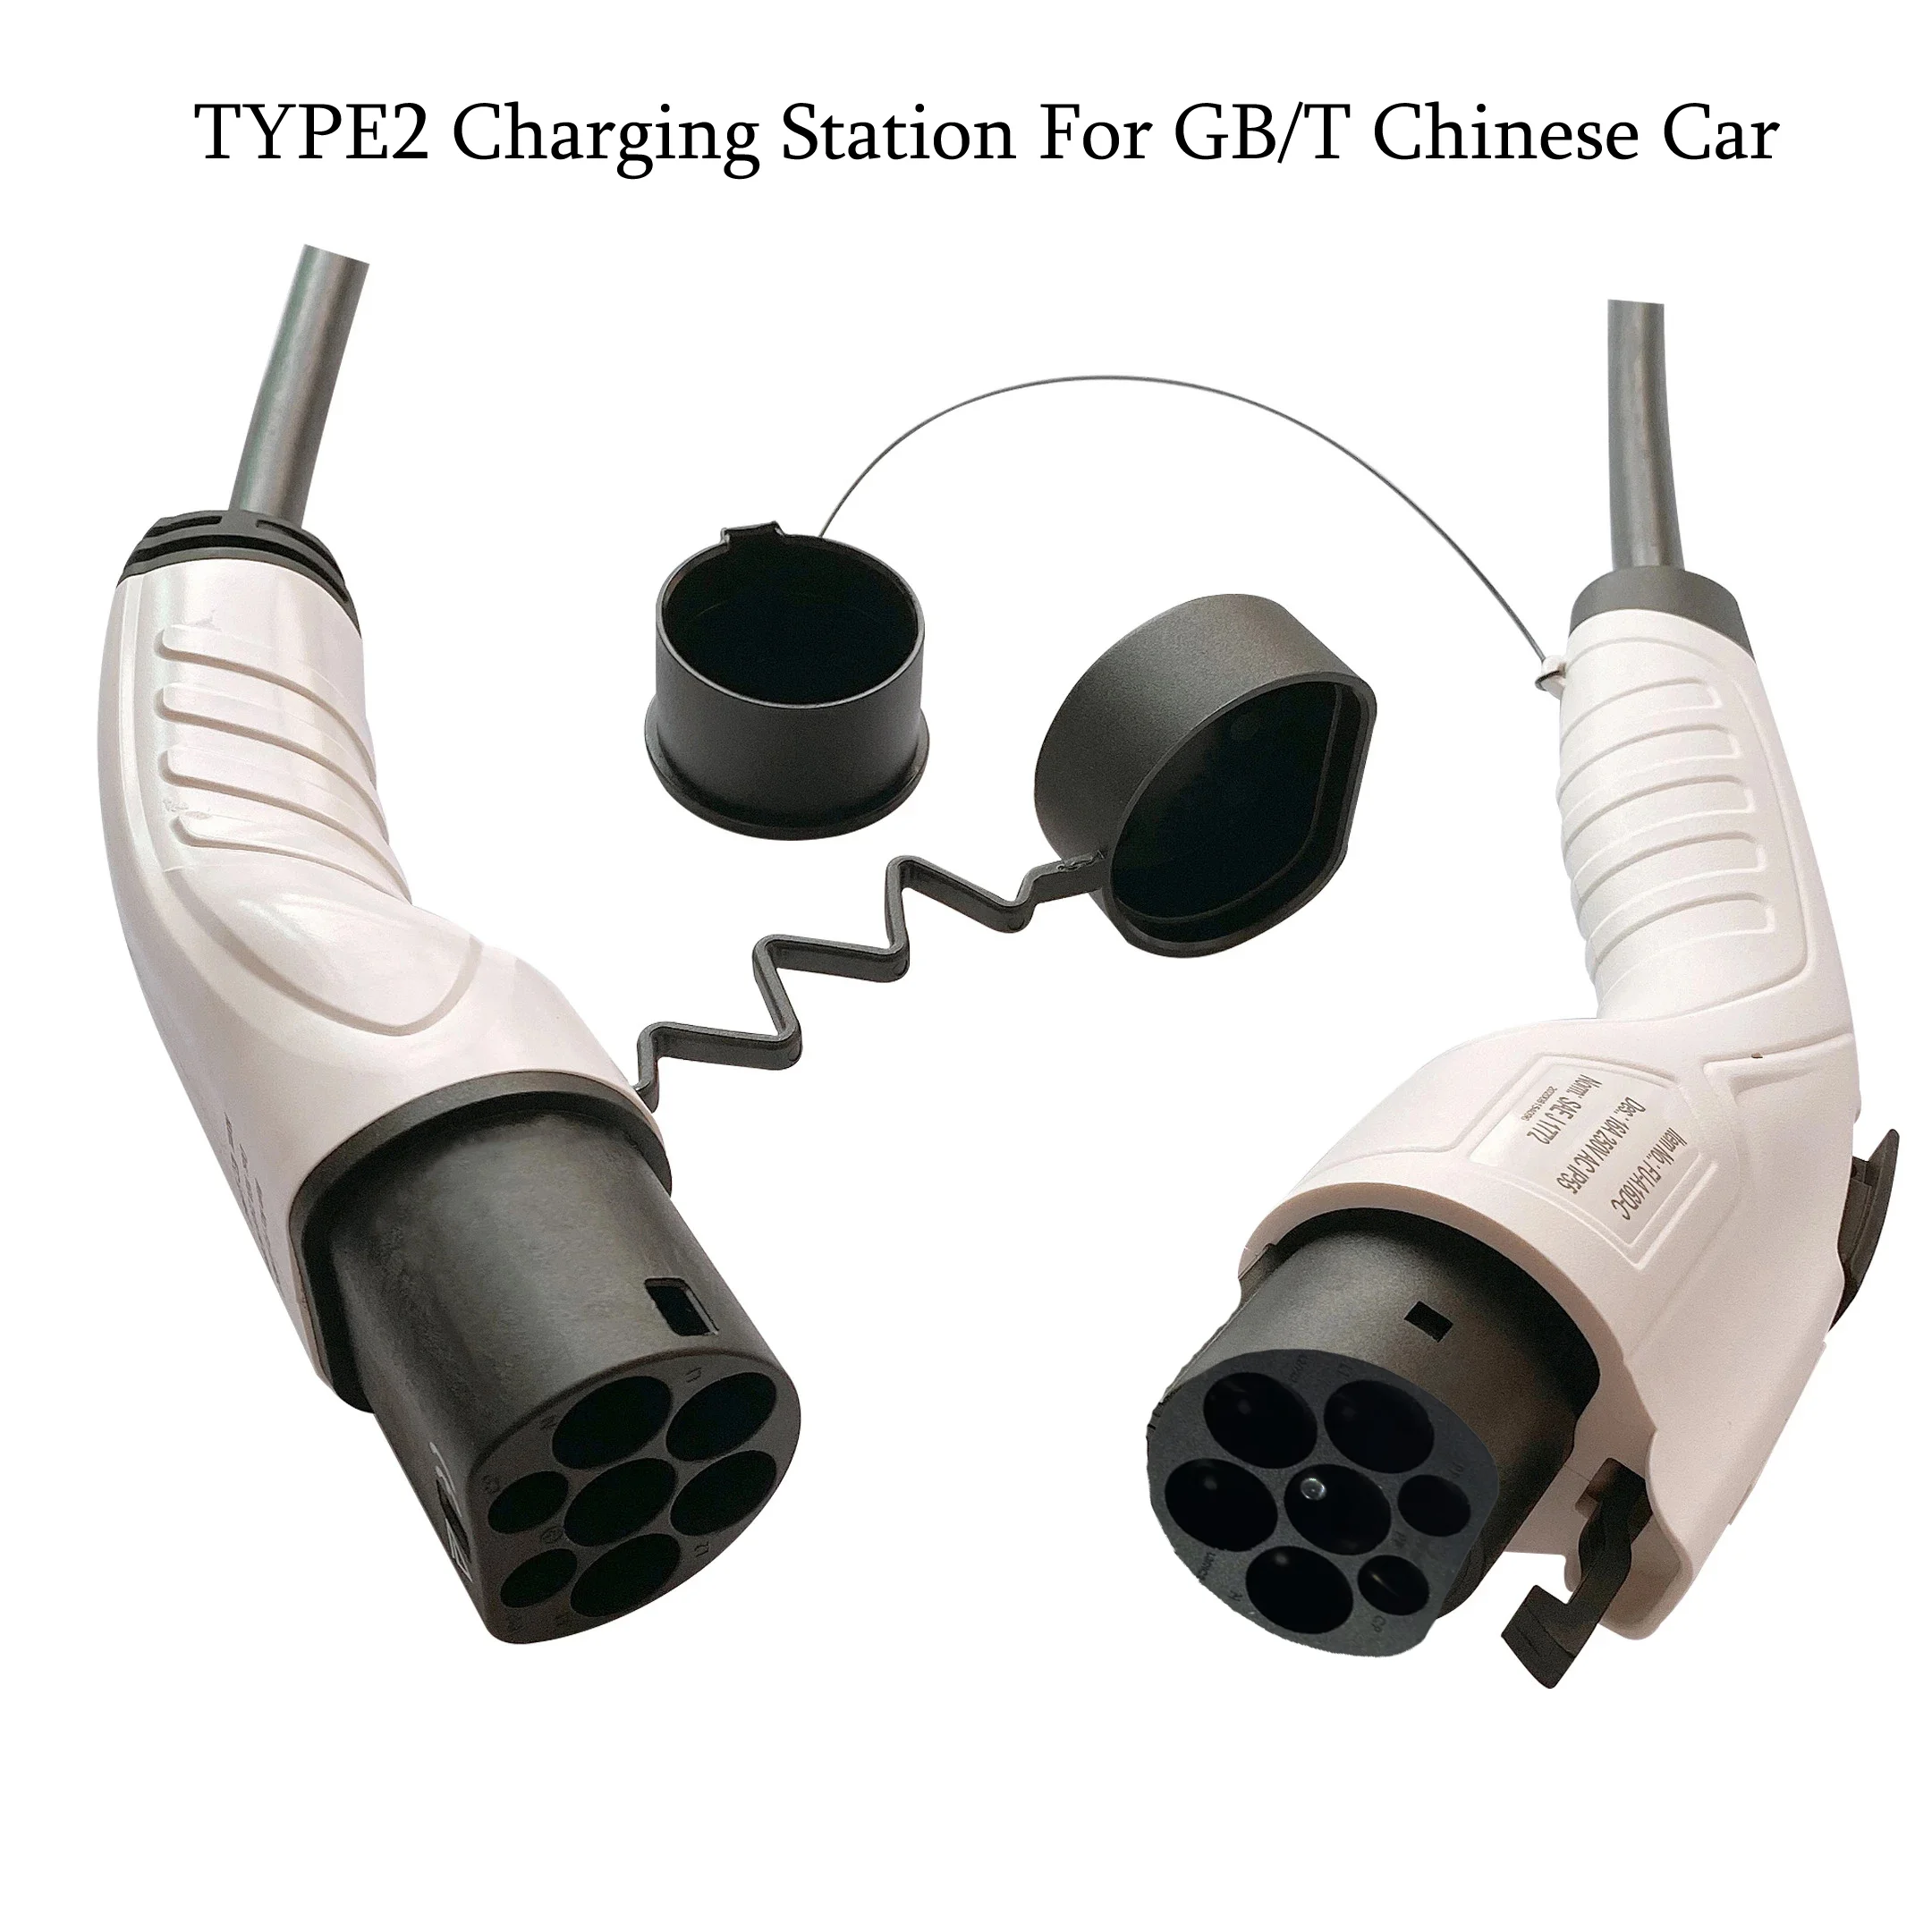 Type 2 To Gbt Ev Charging Cable With Plug 32a 1 Phase Iec 62196 Ev Cable -  Buy 32a Type 2 To Gb/t Ev Charging Cable 5 Meters 7.4kw Gbt Ev Cord,Gbt